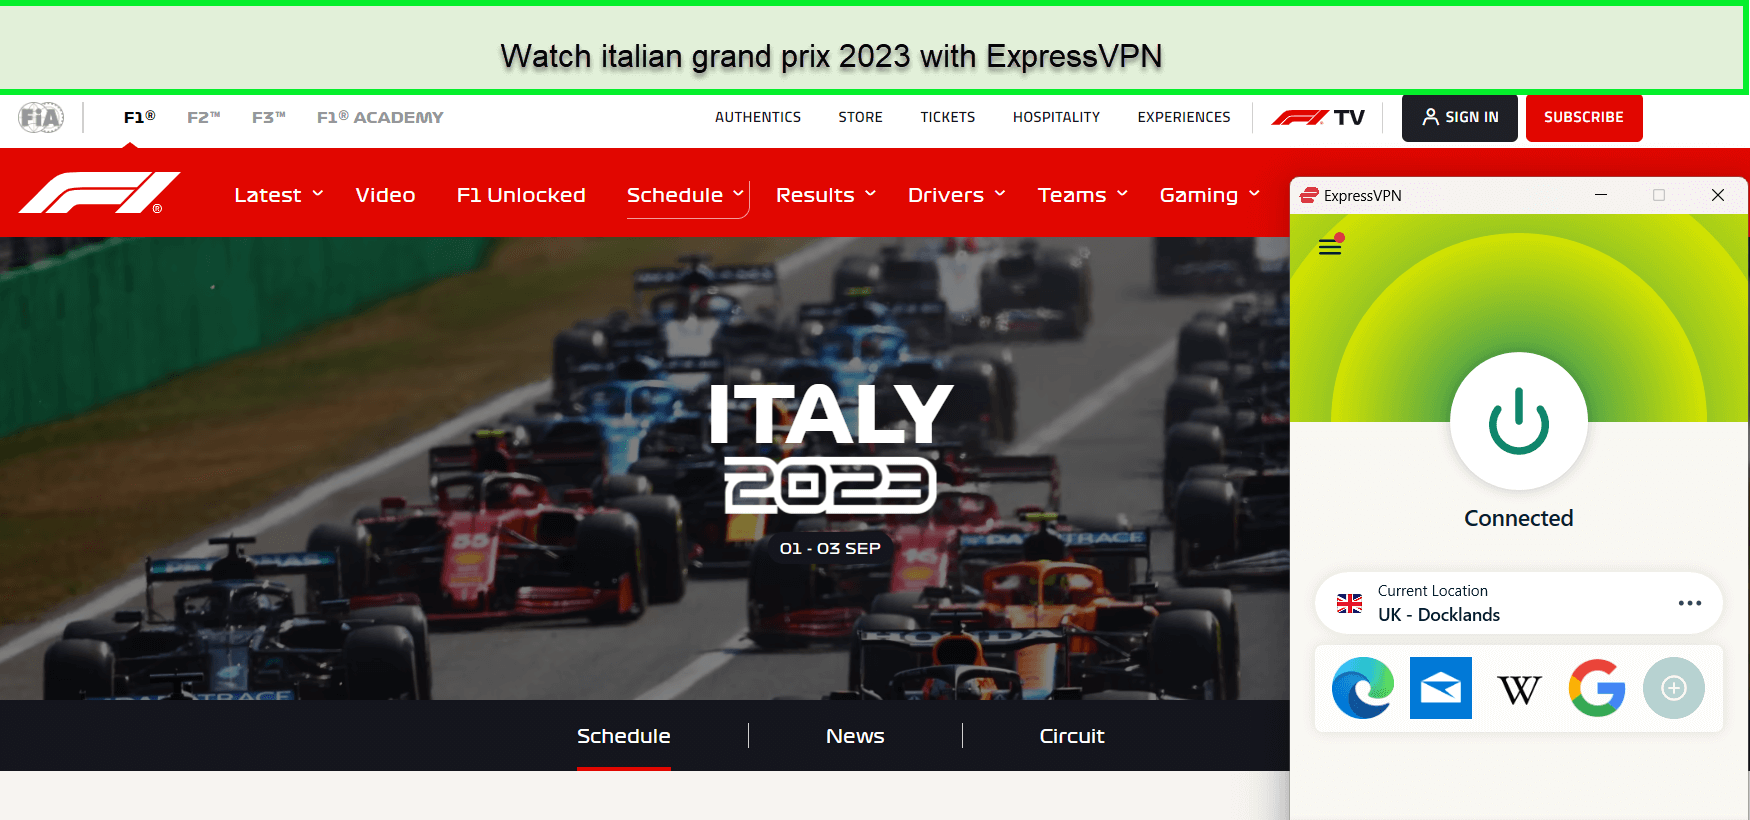 How-to-Watch-Italian-Grand-Prix-2023-in-Japan-on-ITV-with-ExpressVPN